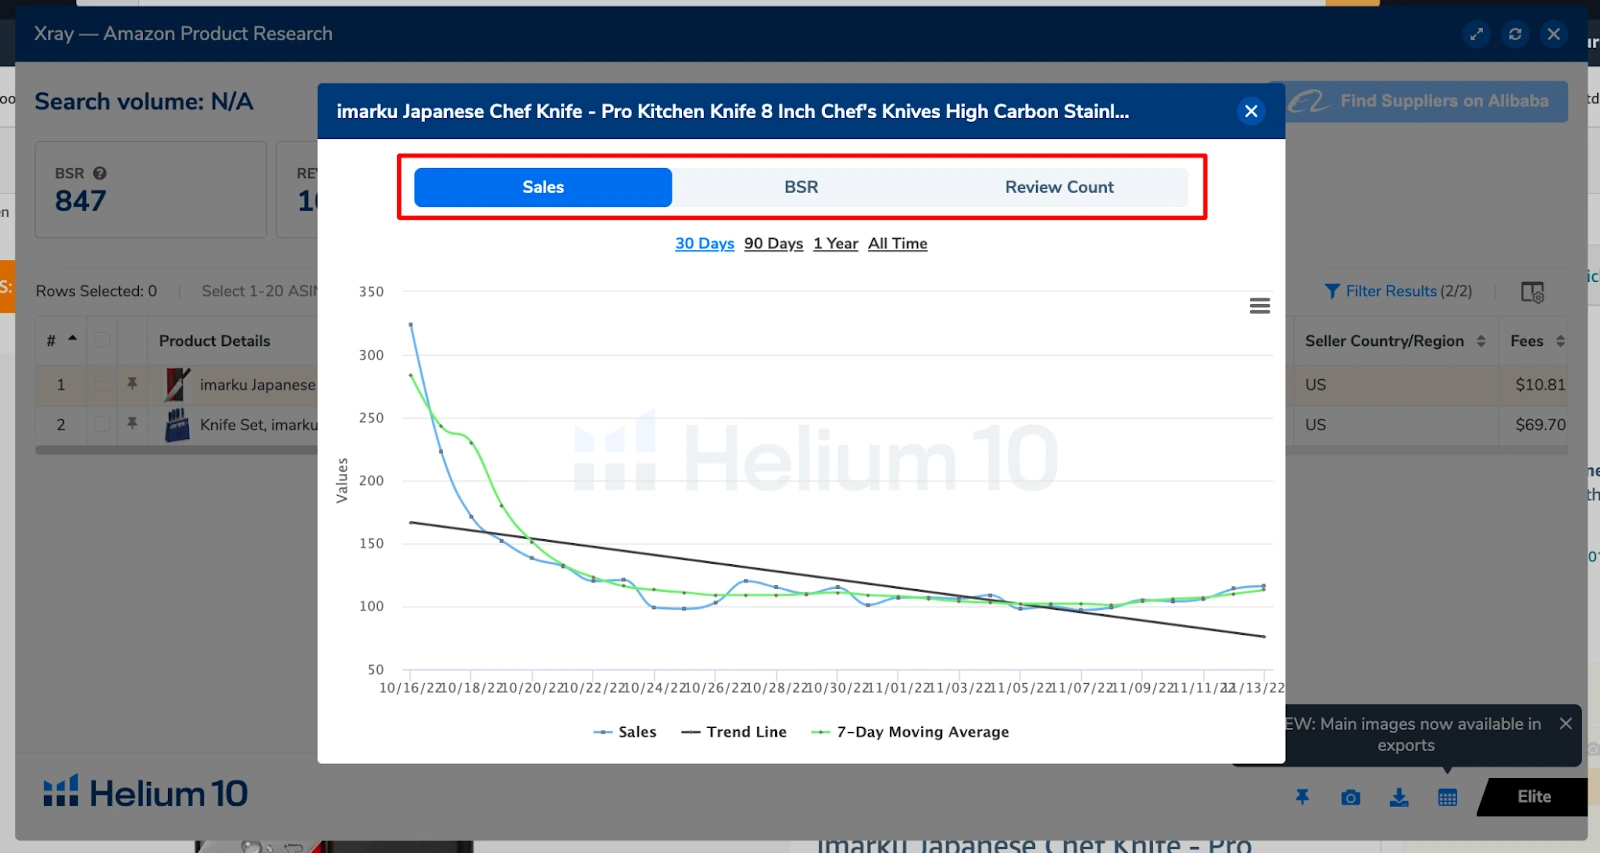 Helium 10 Xray sales, BSR< review data